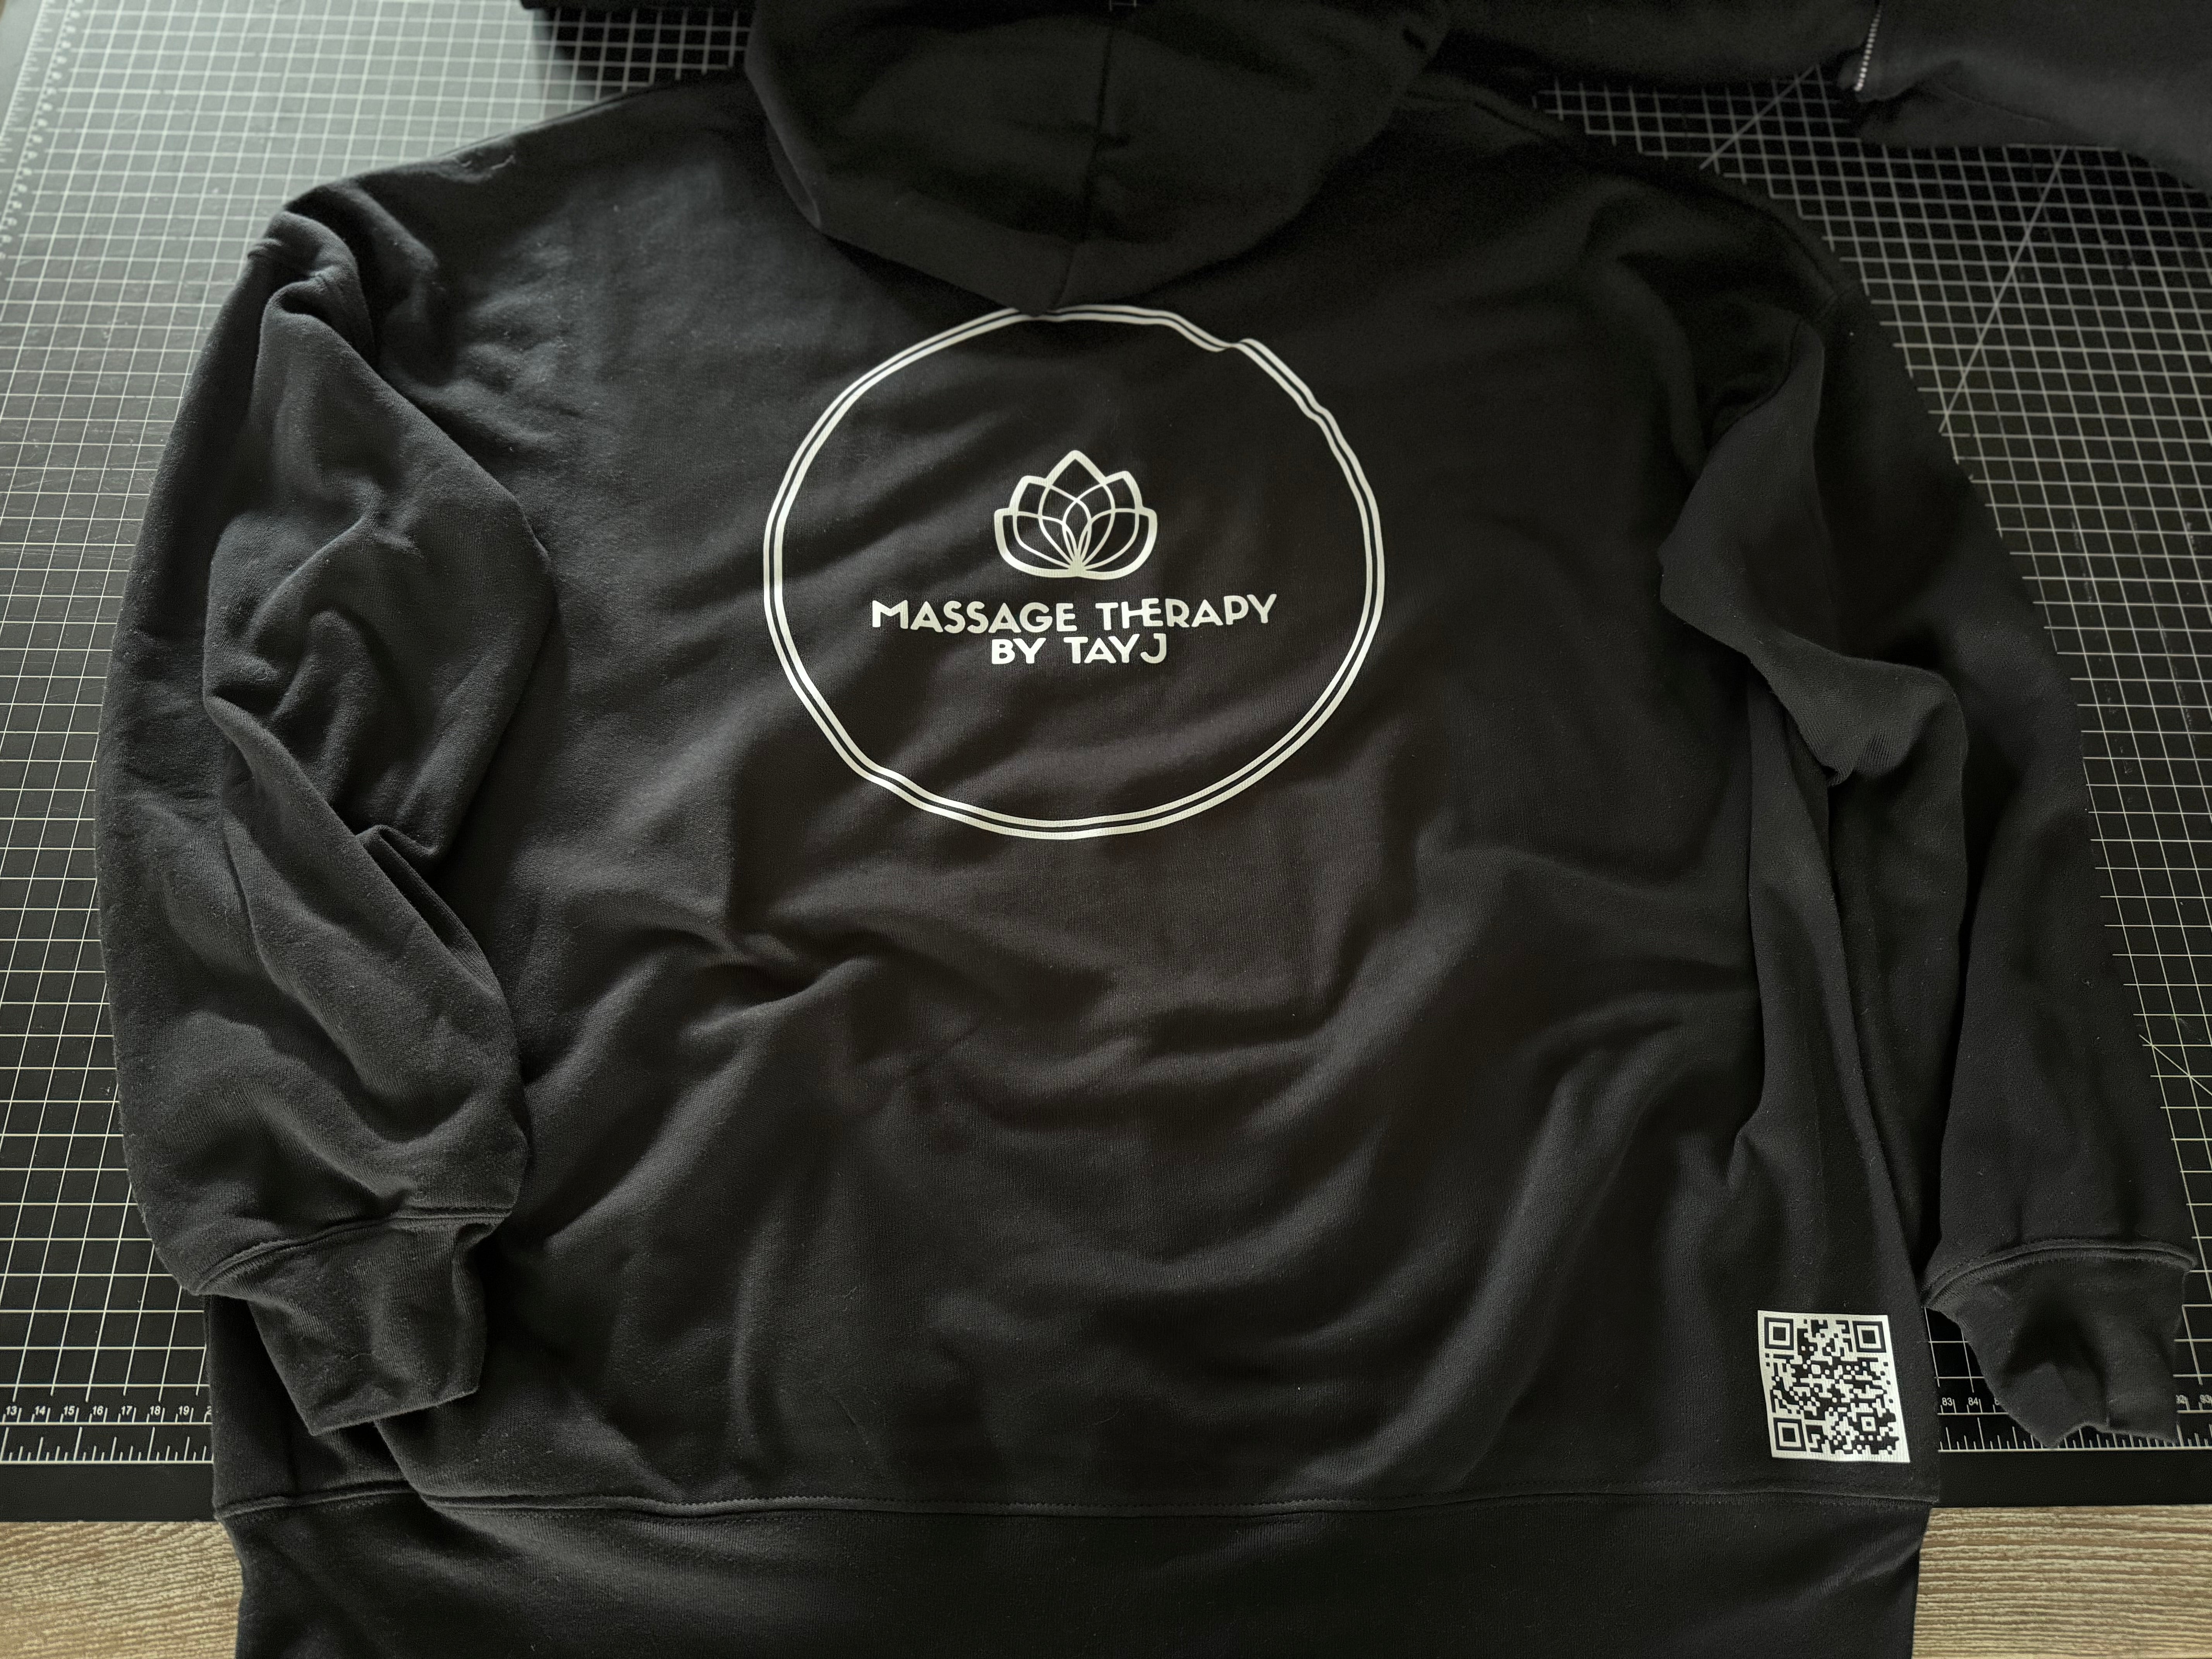 Massage Therapy by Tay J - Custom Zip-Up Sweaters